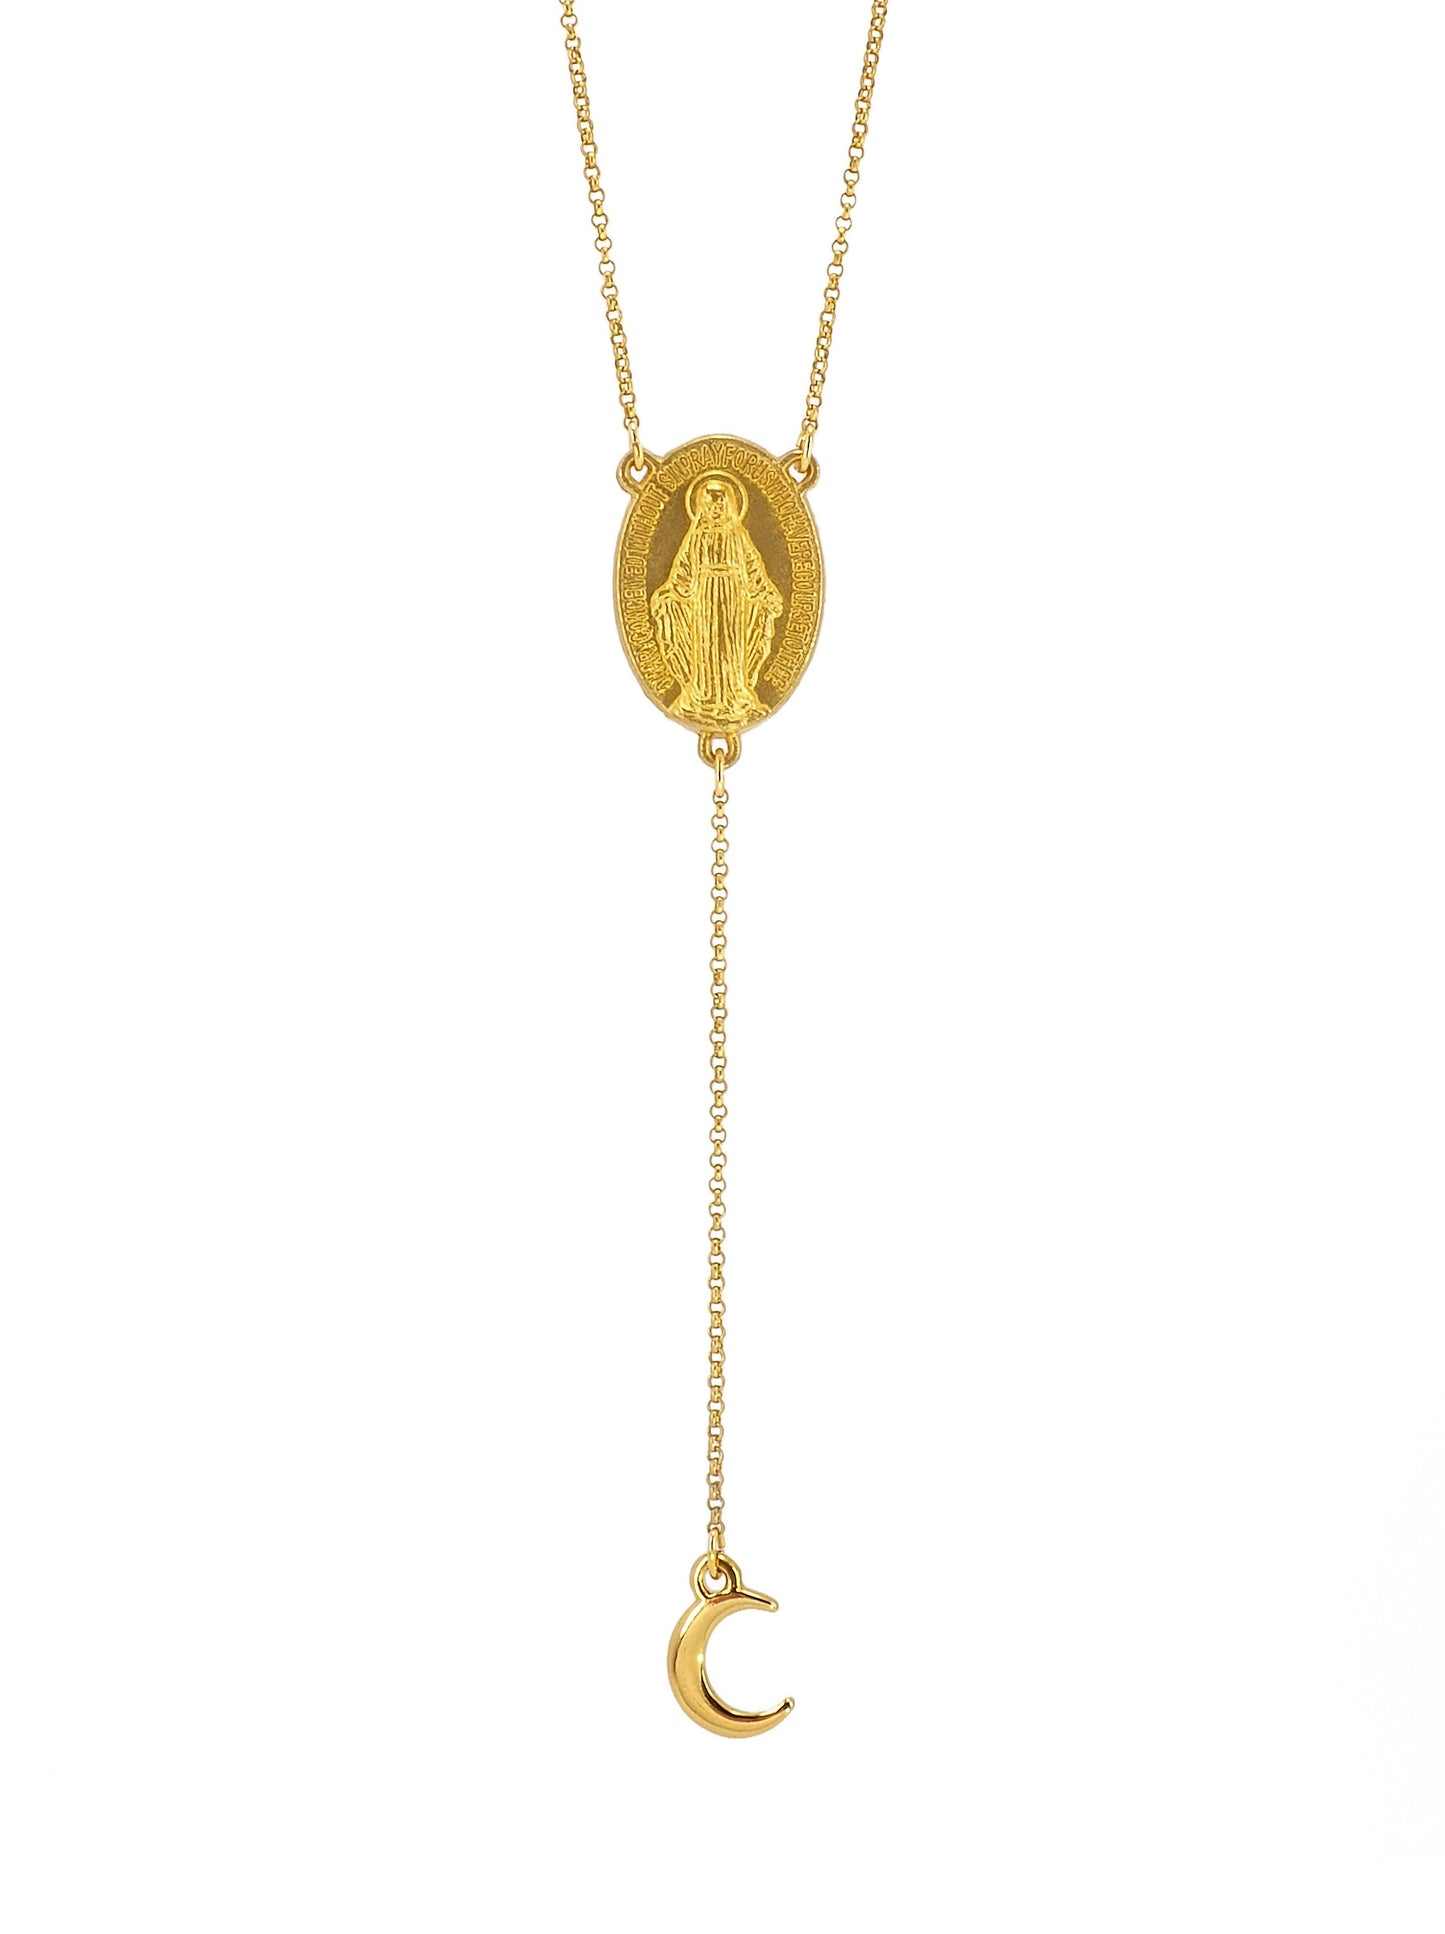 Dainty Gold plated Lariat Necklace featuring a Holy Mary medal and a tiny Crescent Moon pendant.